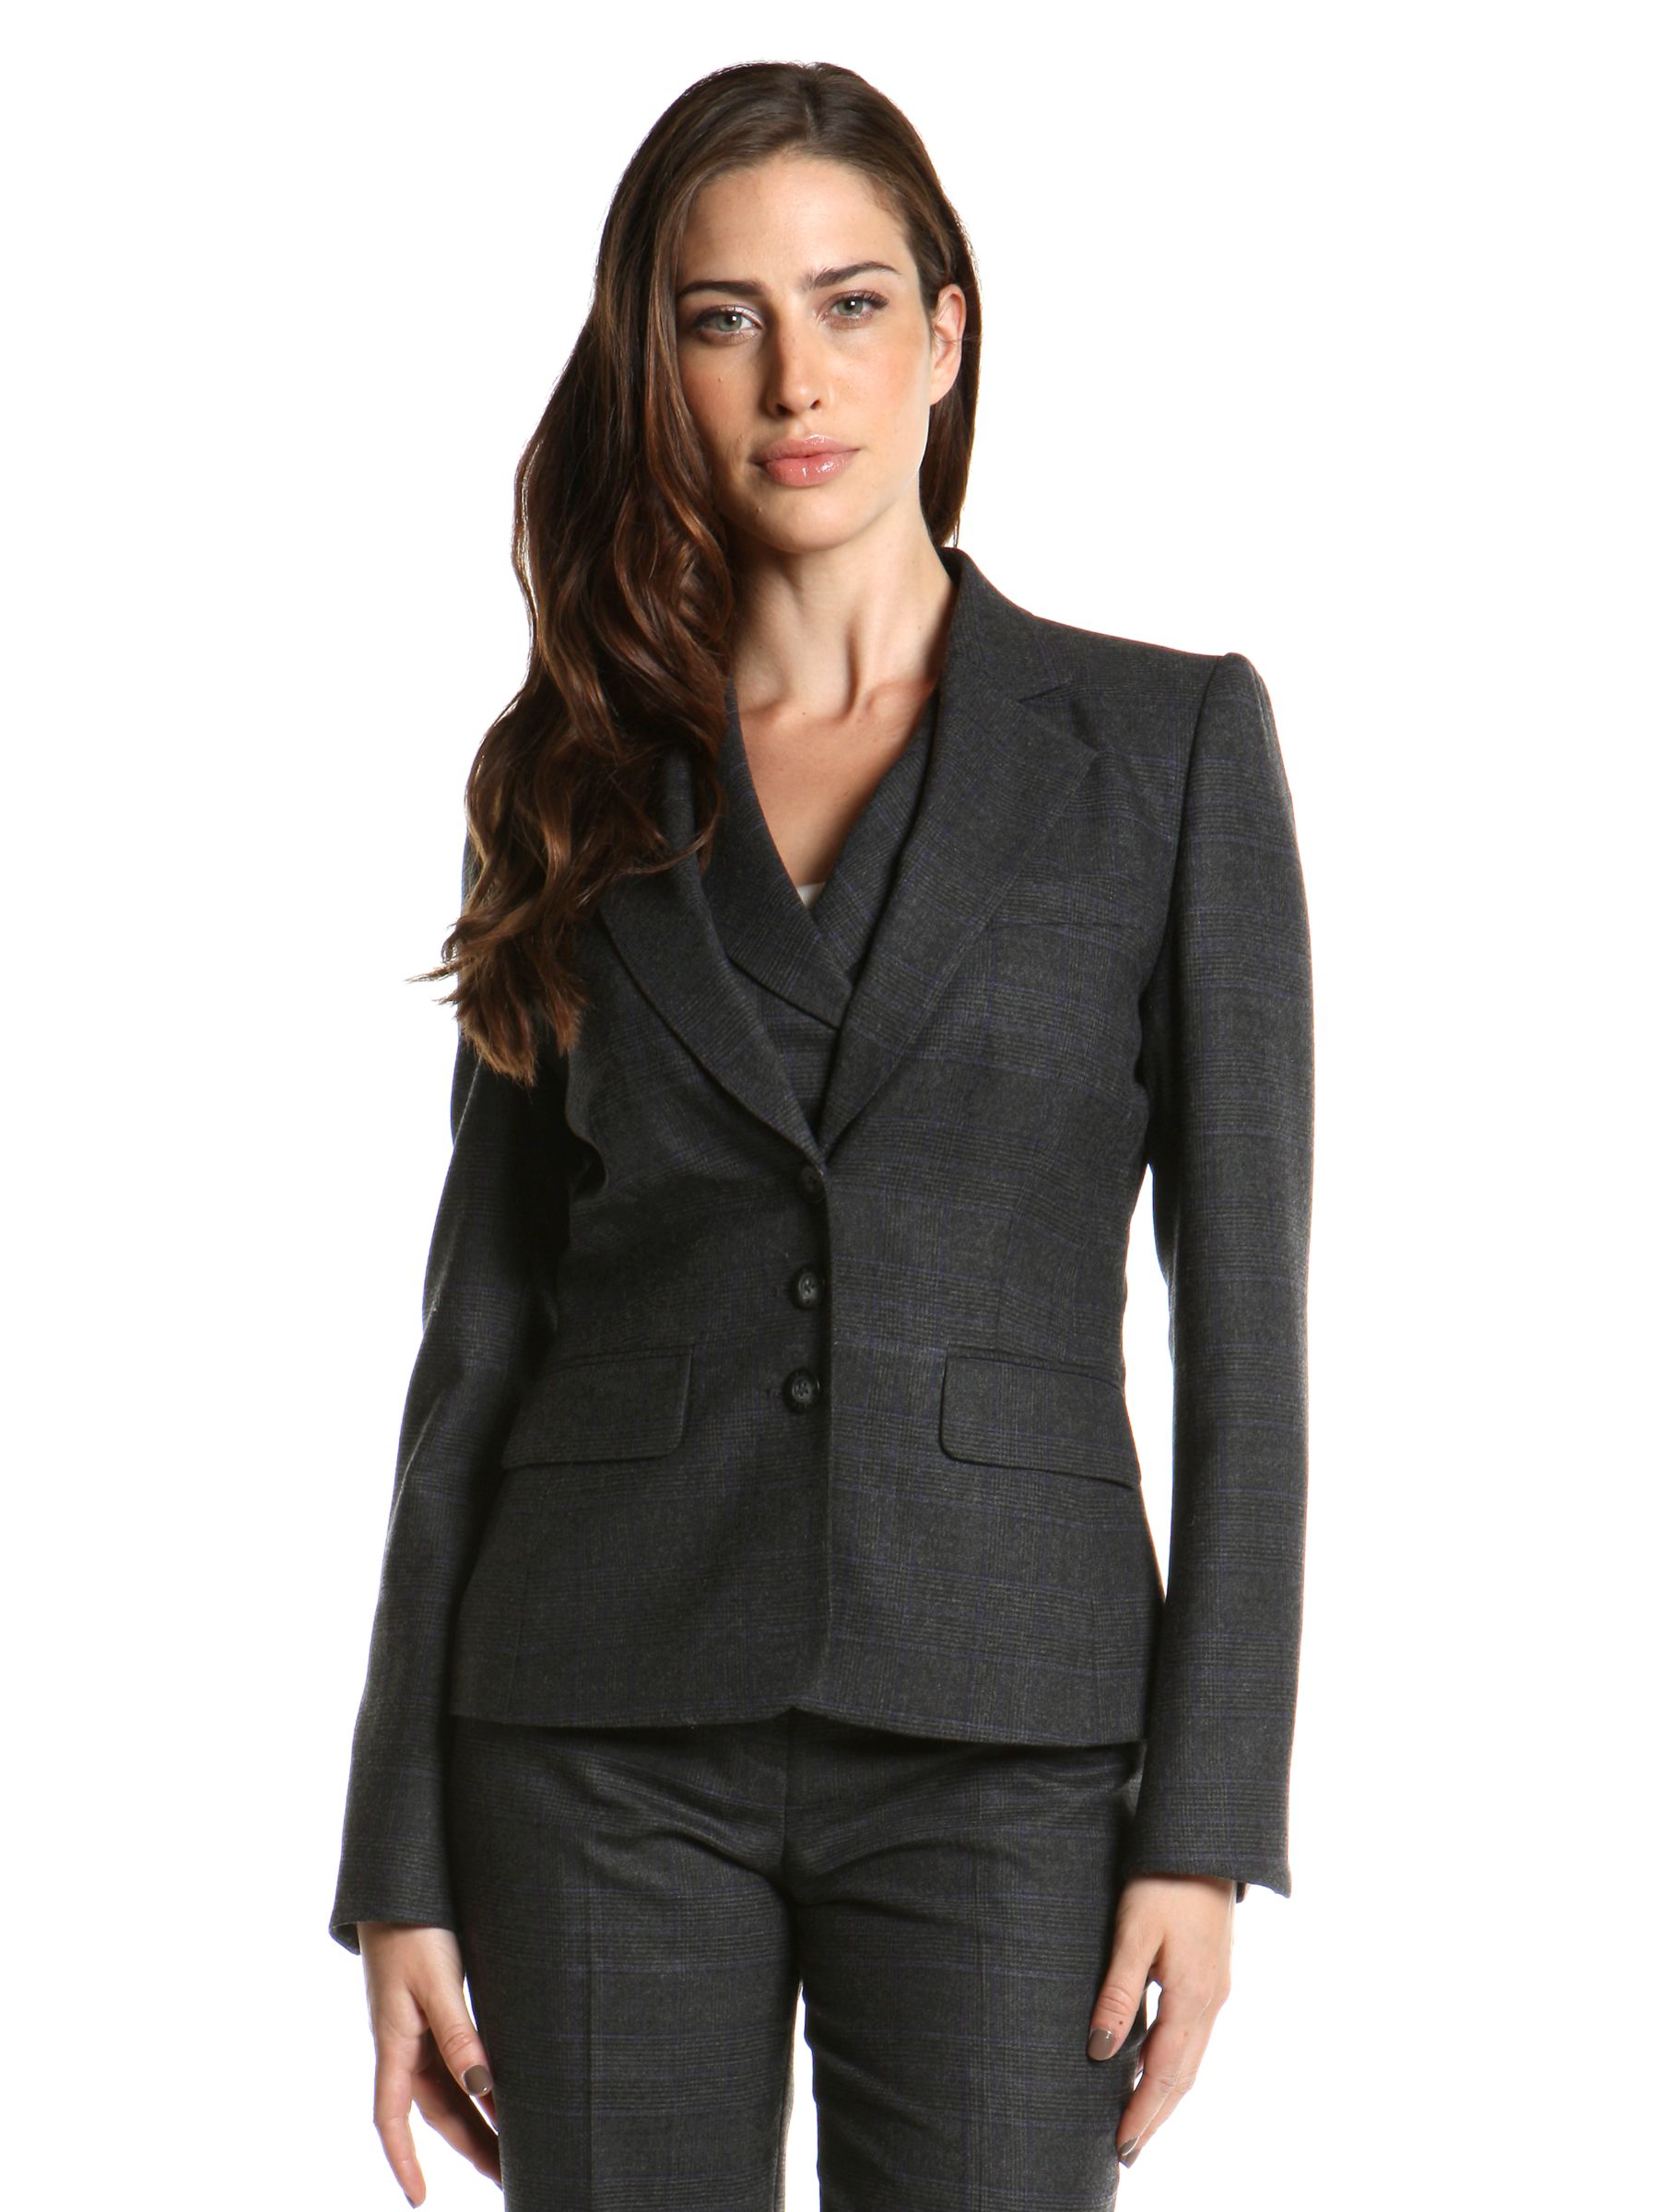 Ted Baker Pow Check Suit Blazer, Grey at JohnLewis